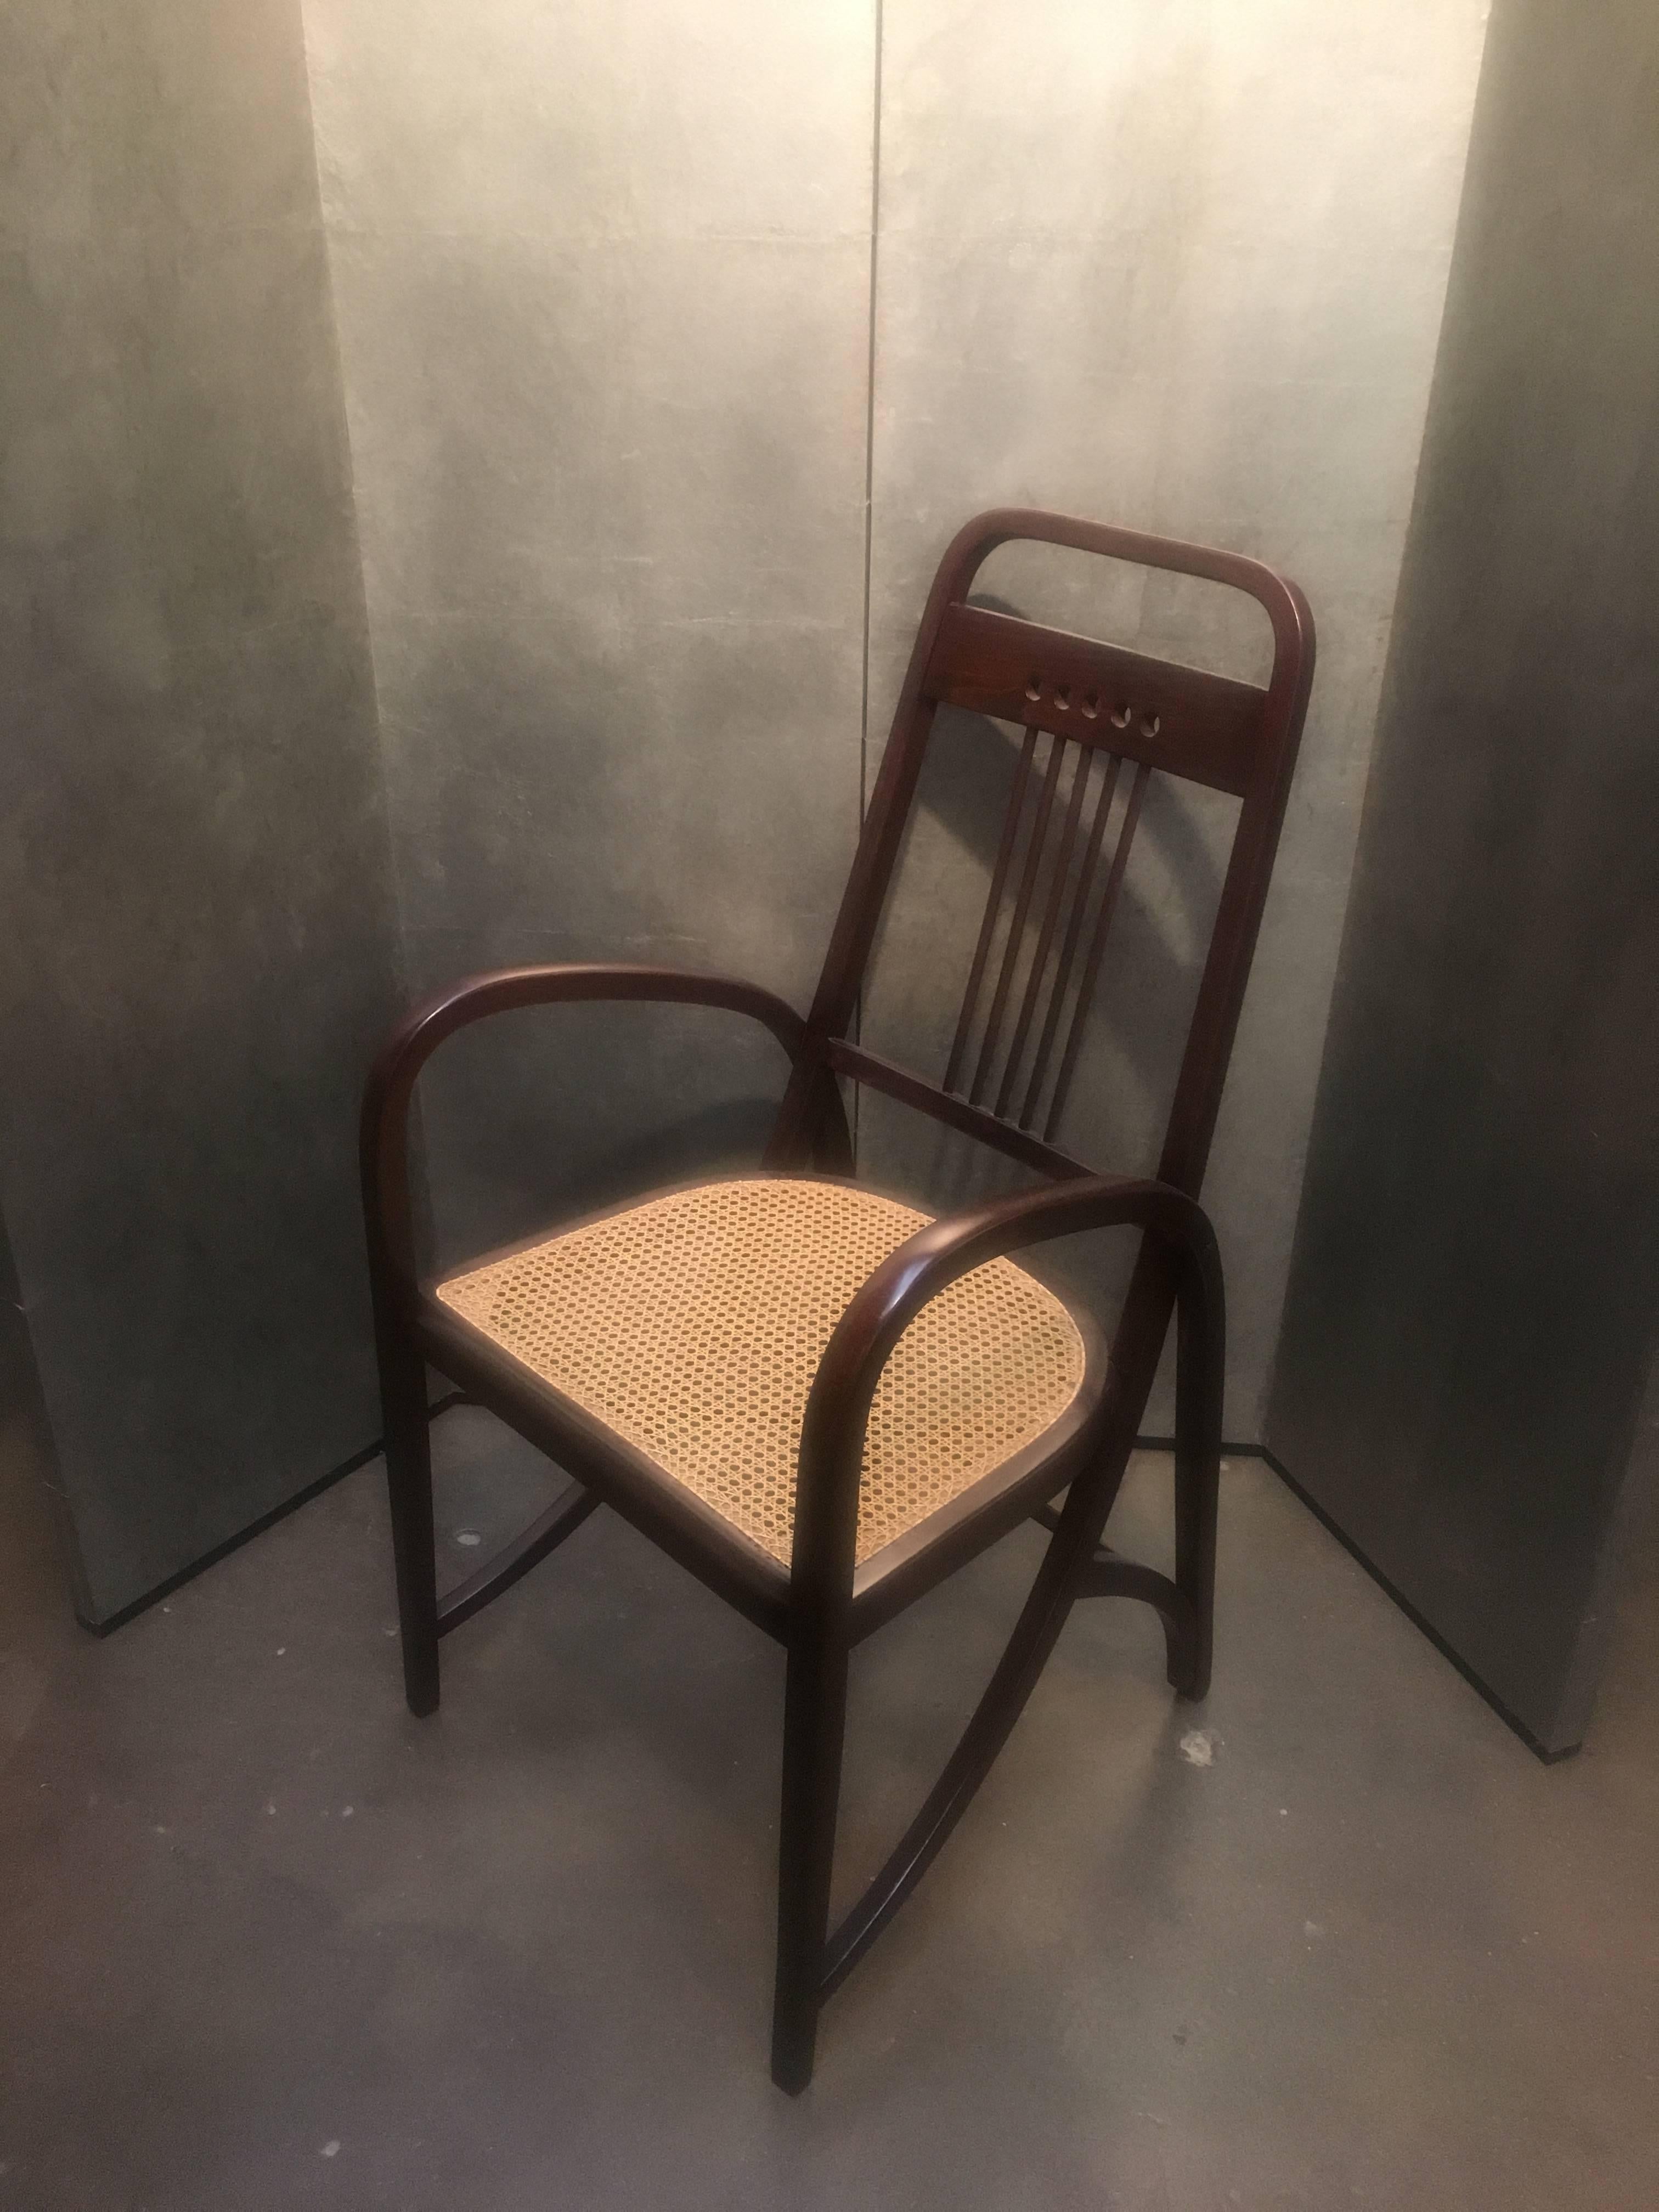 An iconic armchair of the Vienna Secession movement, the Thonet model no. 511 bent beechwood armchair, featuring stunning lines and beautiful proportions. A design tour de force, it is both simple and complex, with the legs and arms crafted from a